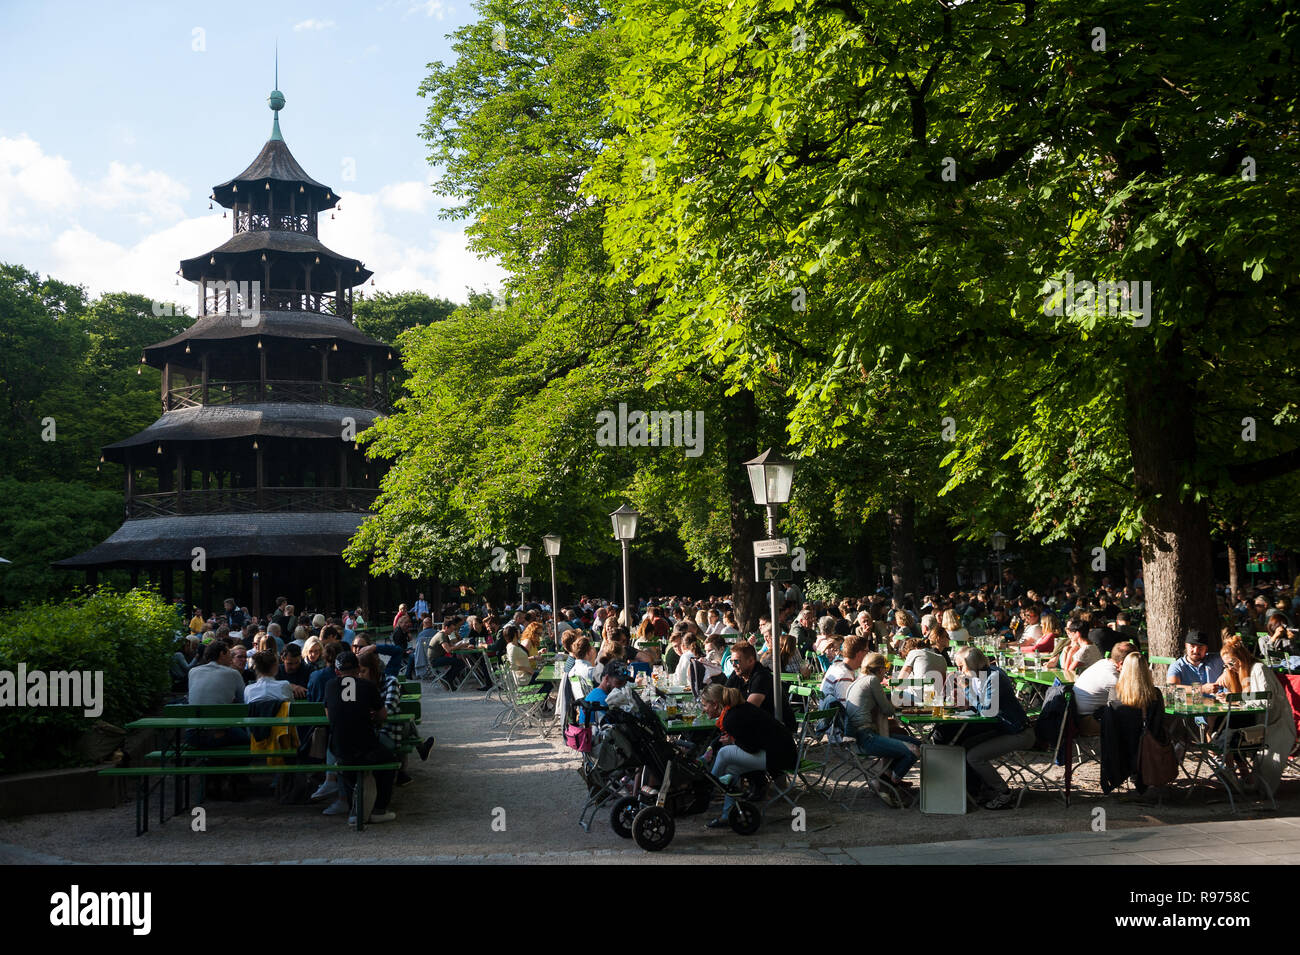 04.06.2017, Munich, Bavaria, Germany, Europe - Beer garden at the Chinese Tower in the English Garden. Stock Photo